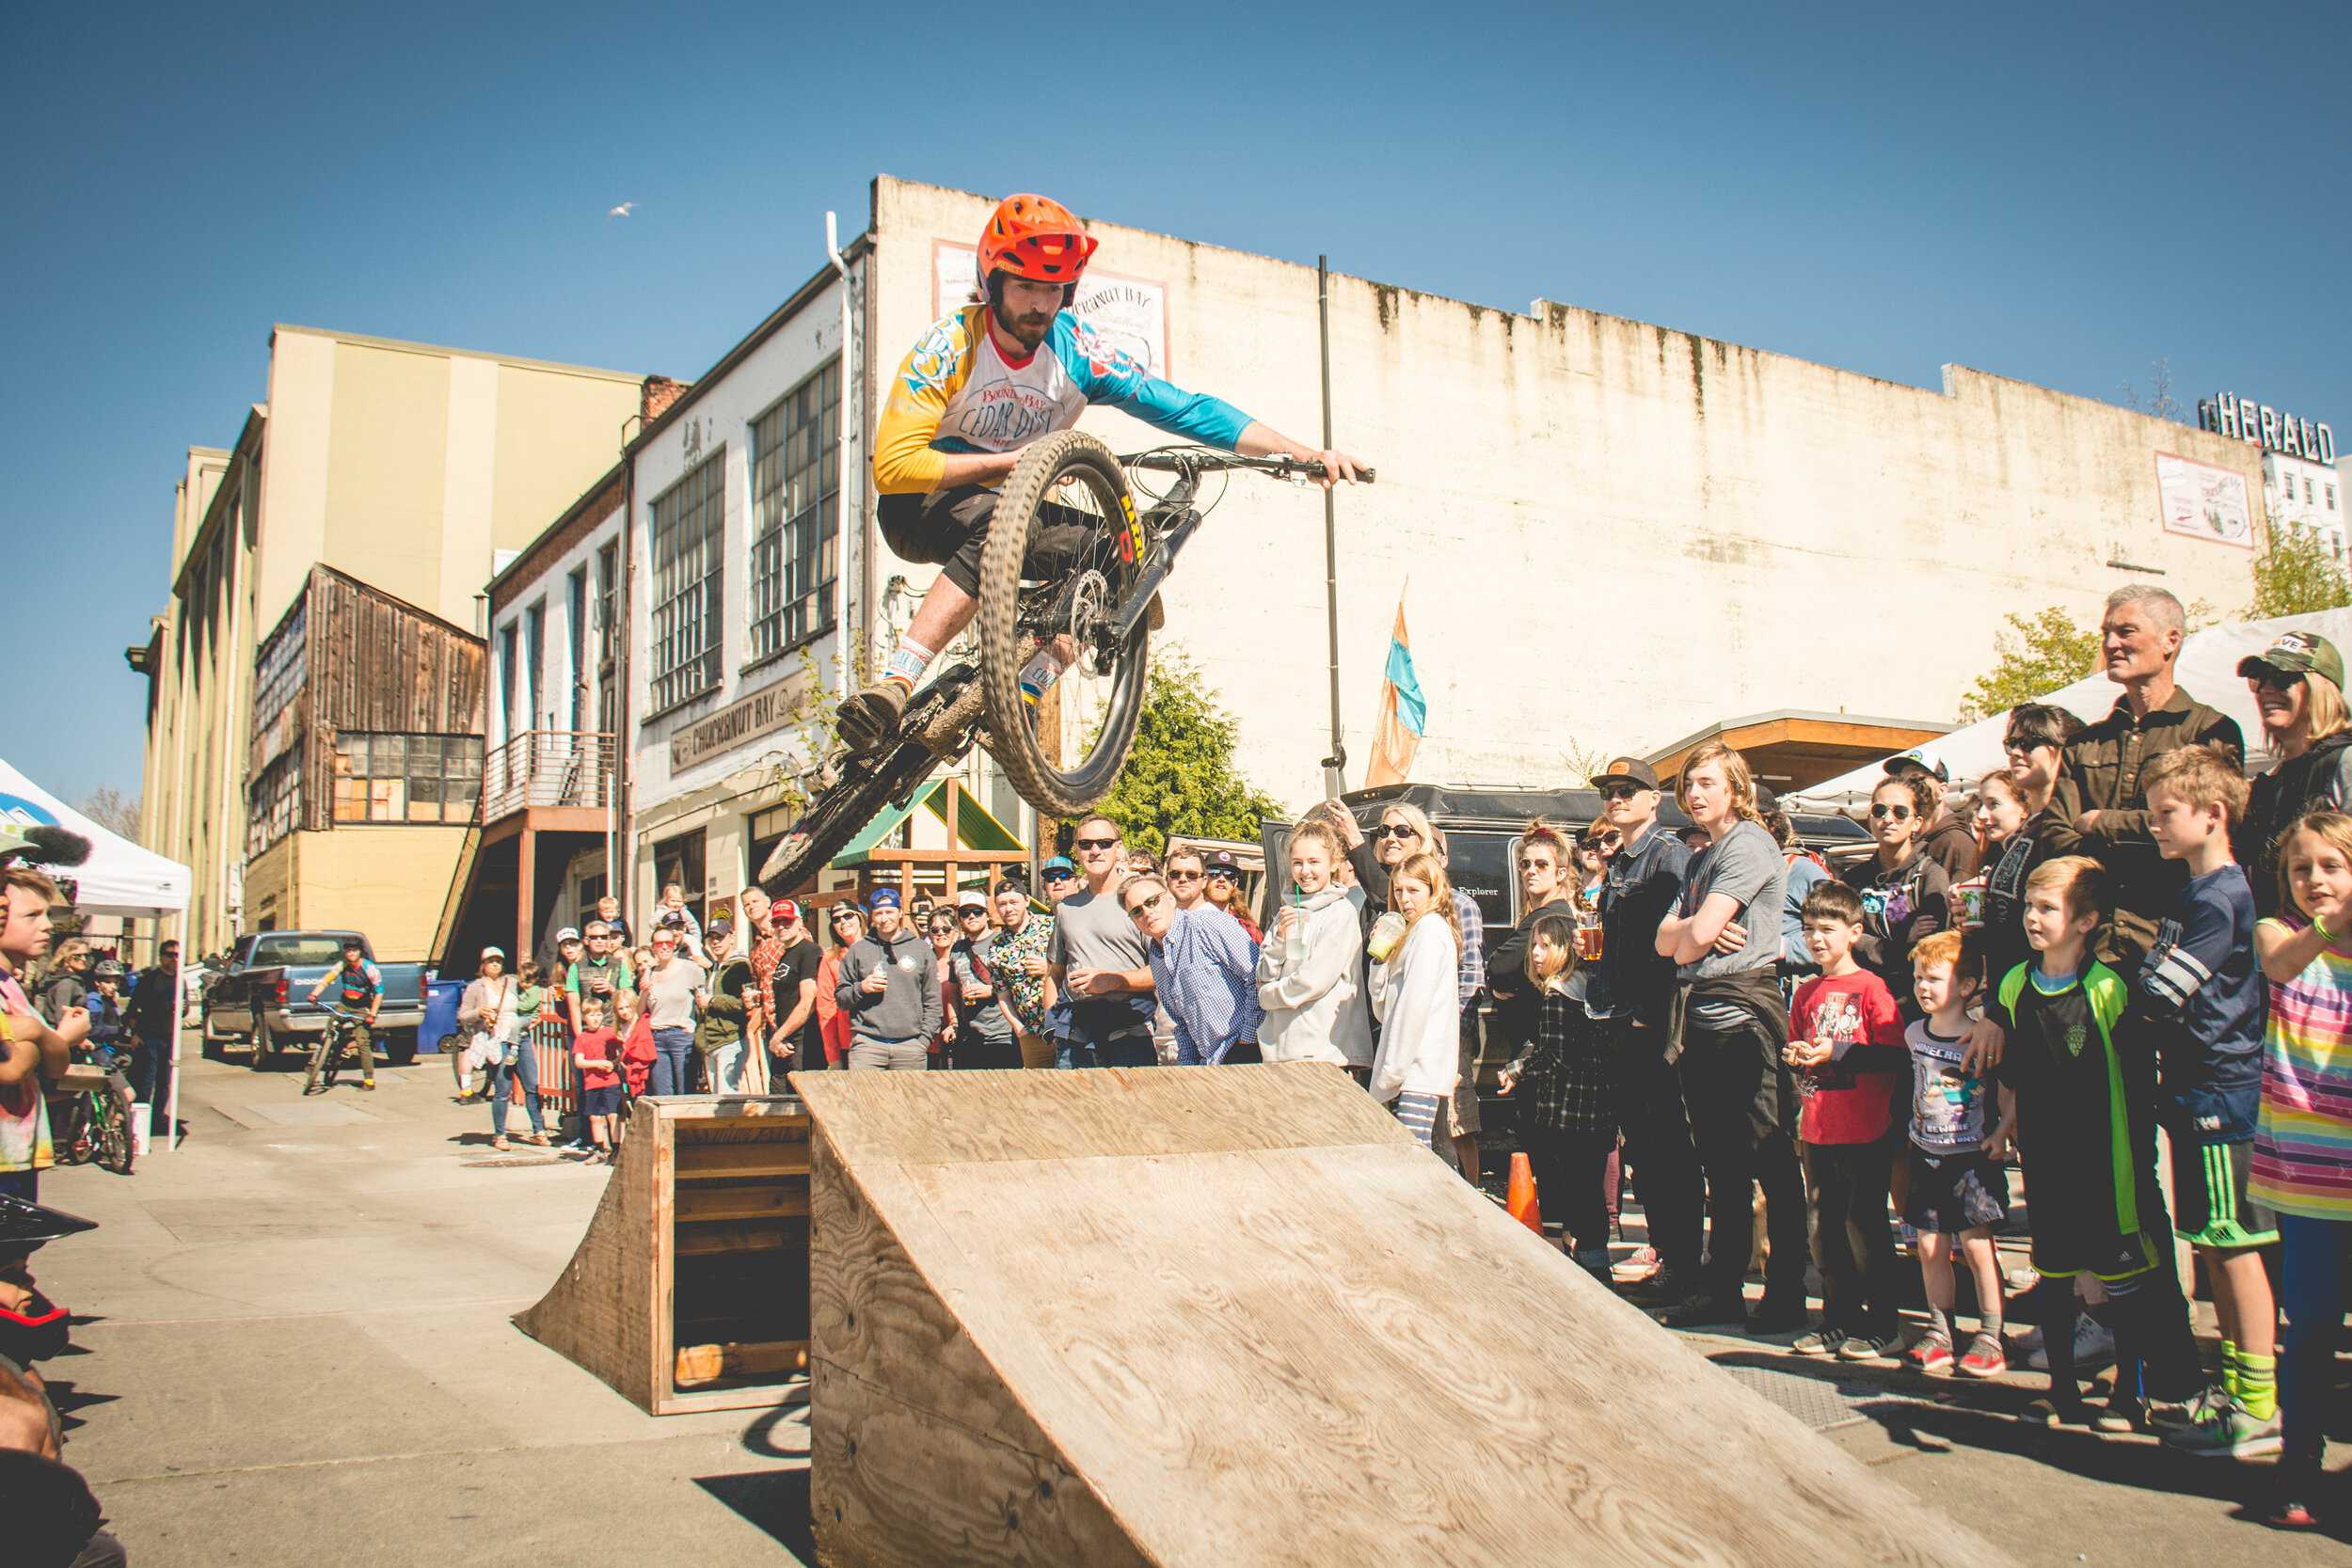 An image of employee Forrest Montgomery executing a jump on his bike at our annual Cedar Dust Alley Event.